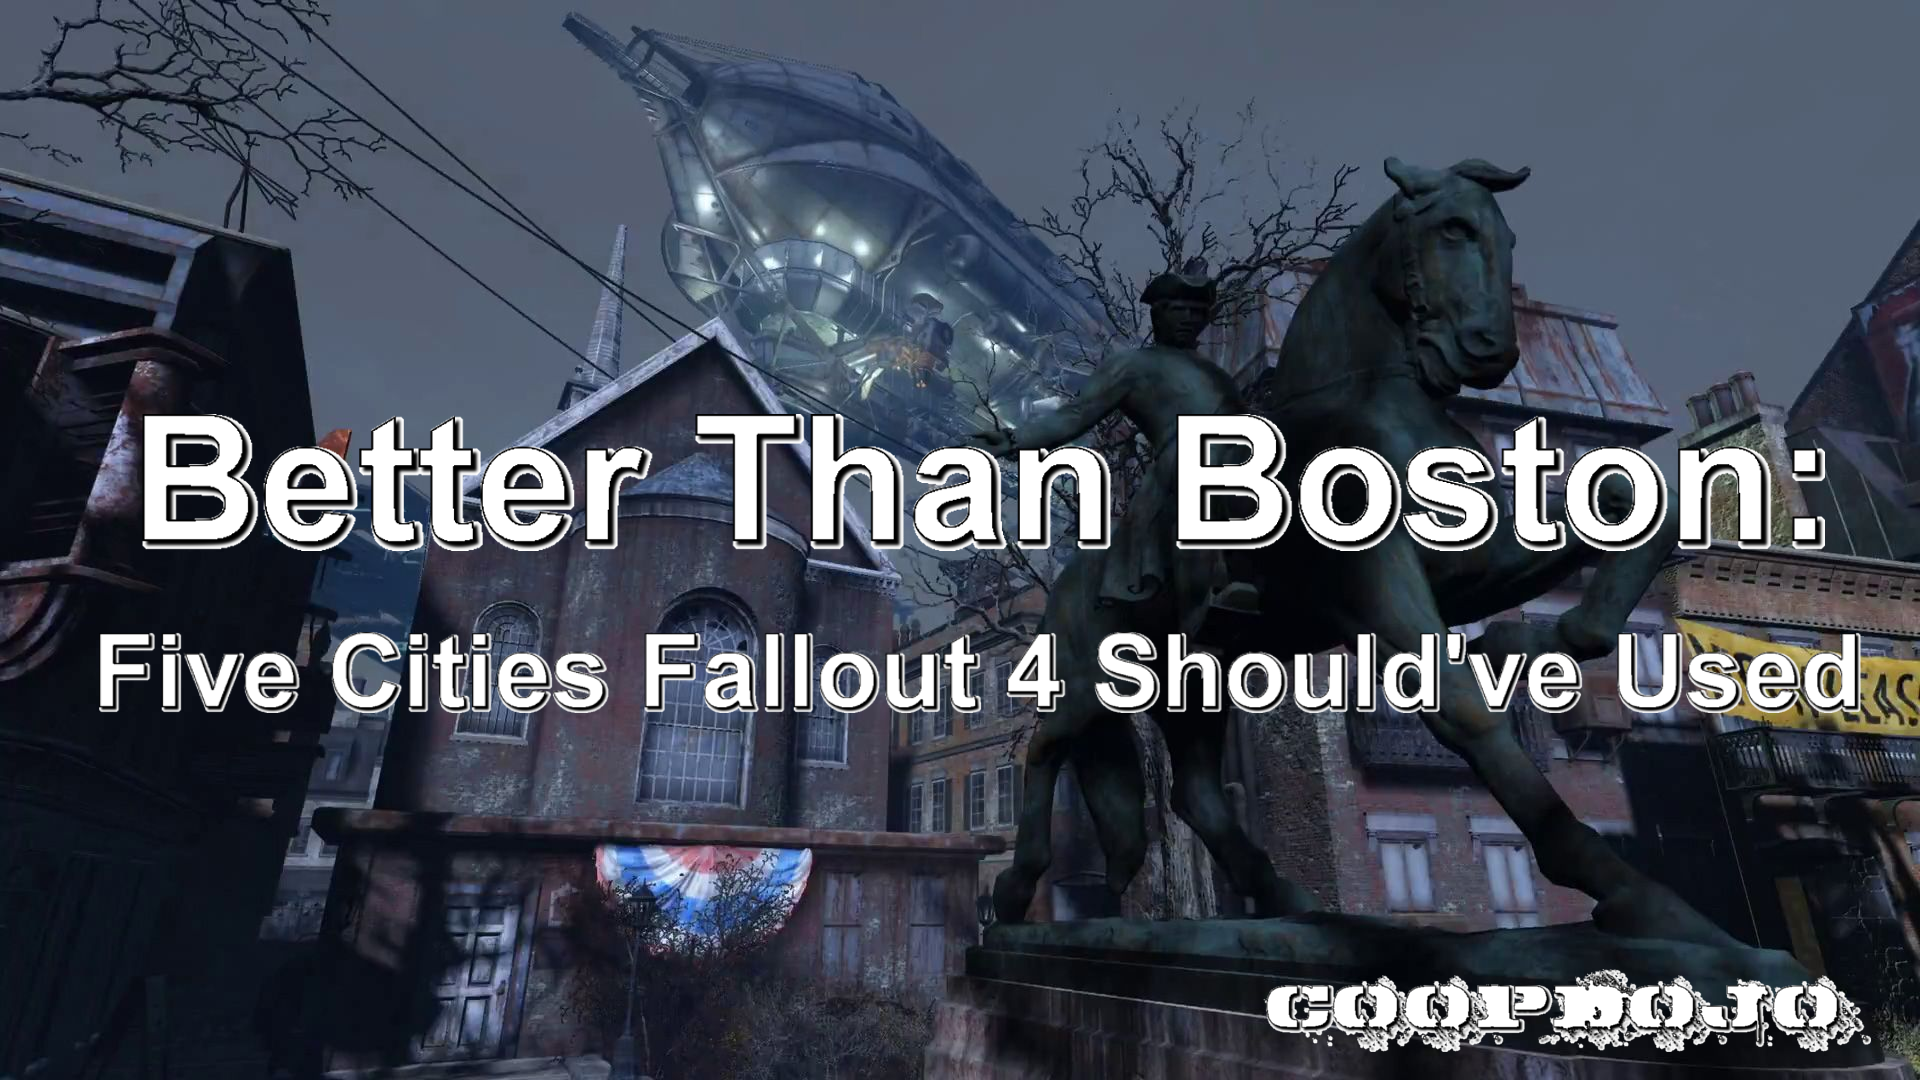 Better Than Boston: Five Cities Fallout 4 Should’ve Used